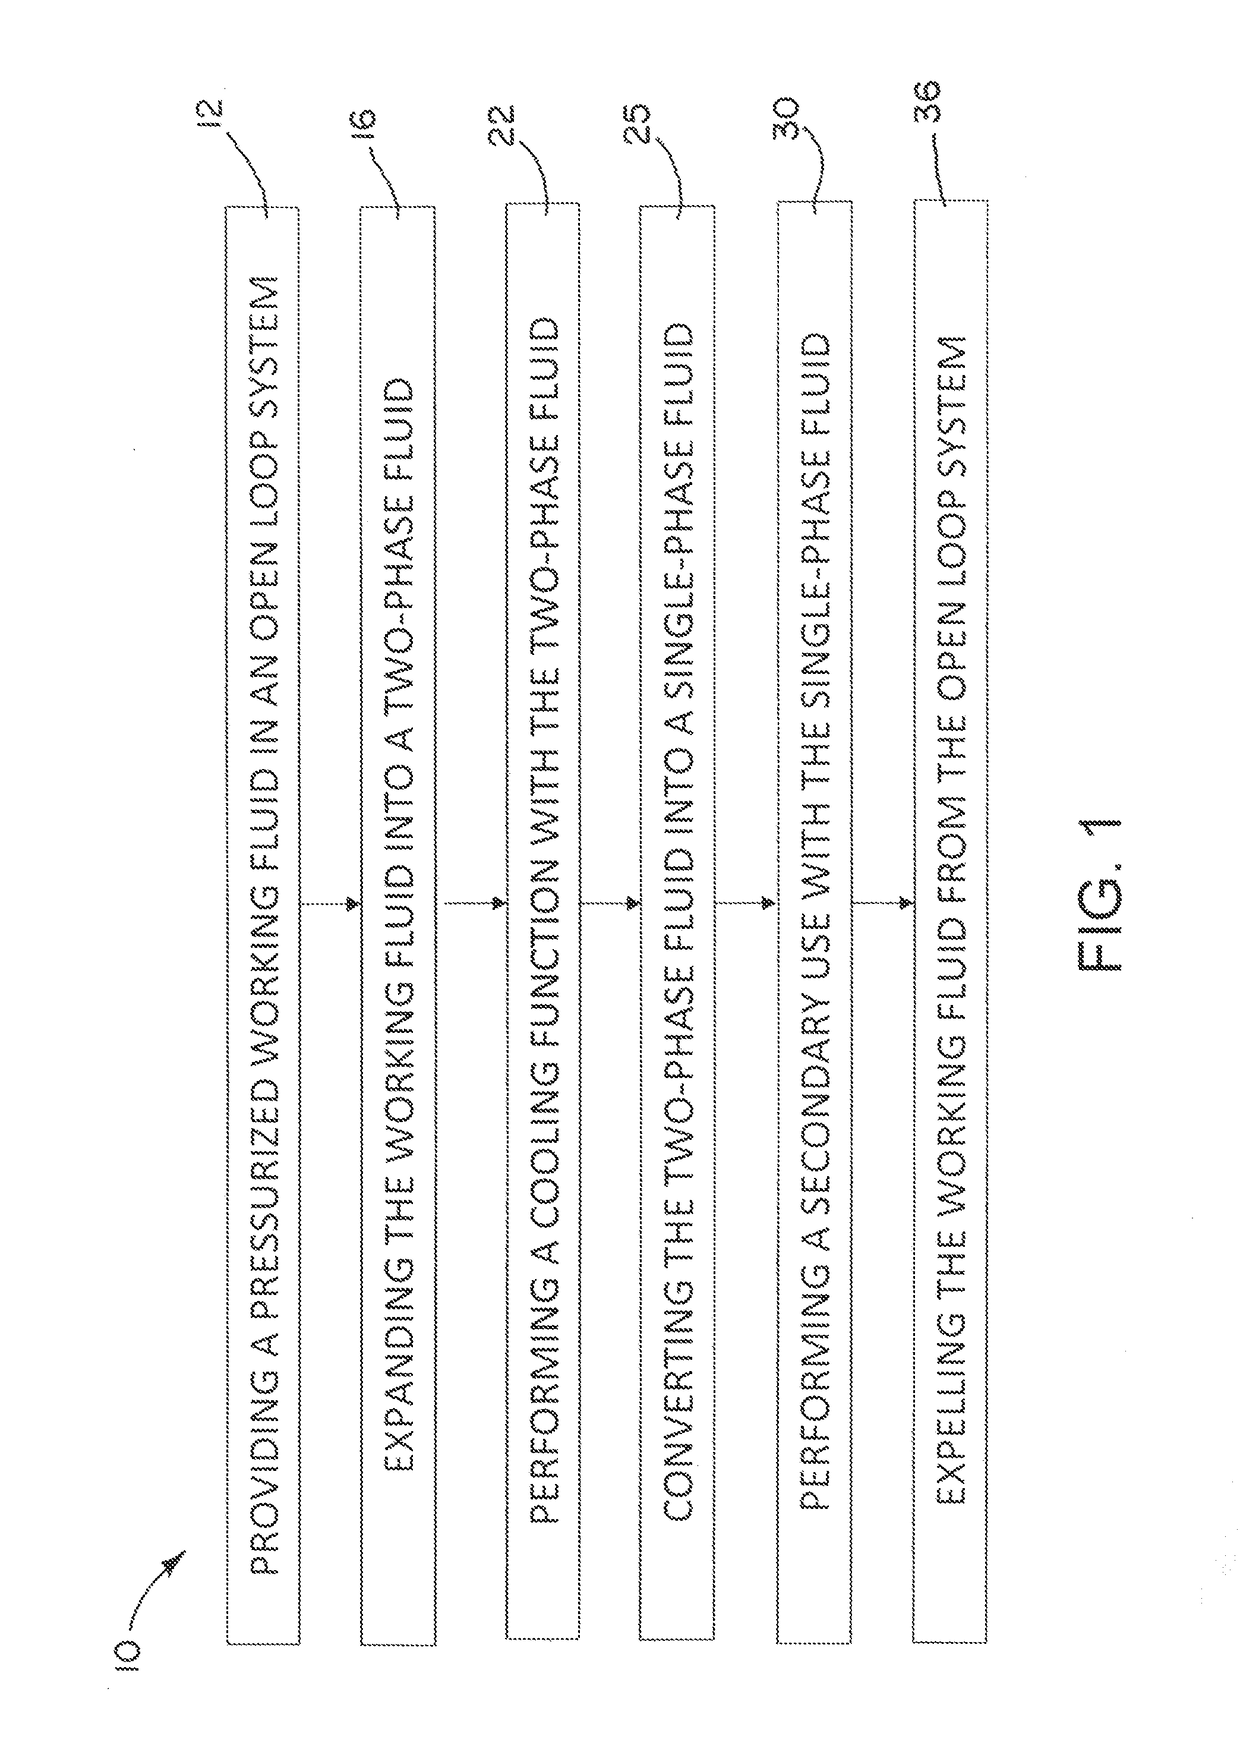 Multifunctional aerodynamic, propulsion, and thermal control system